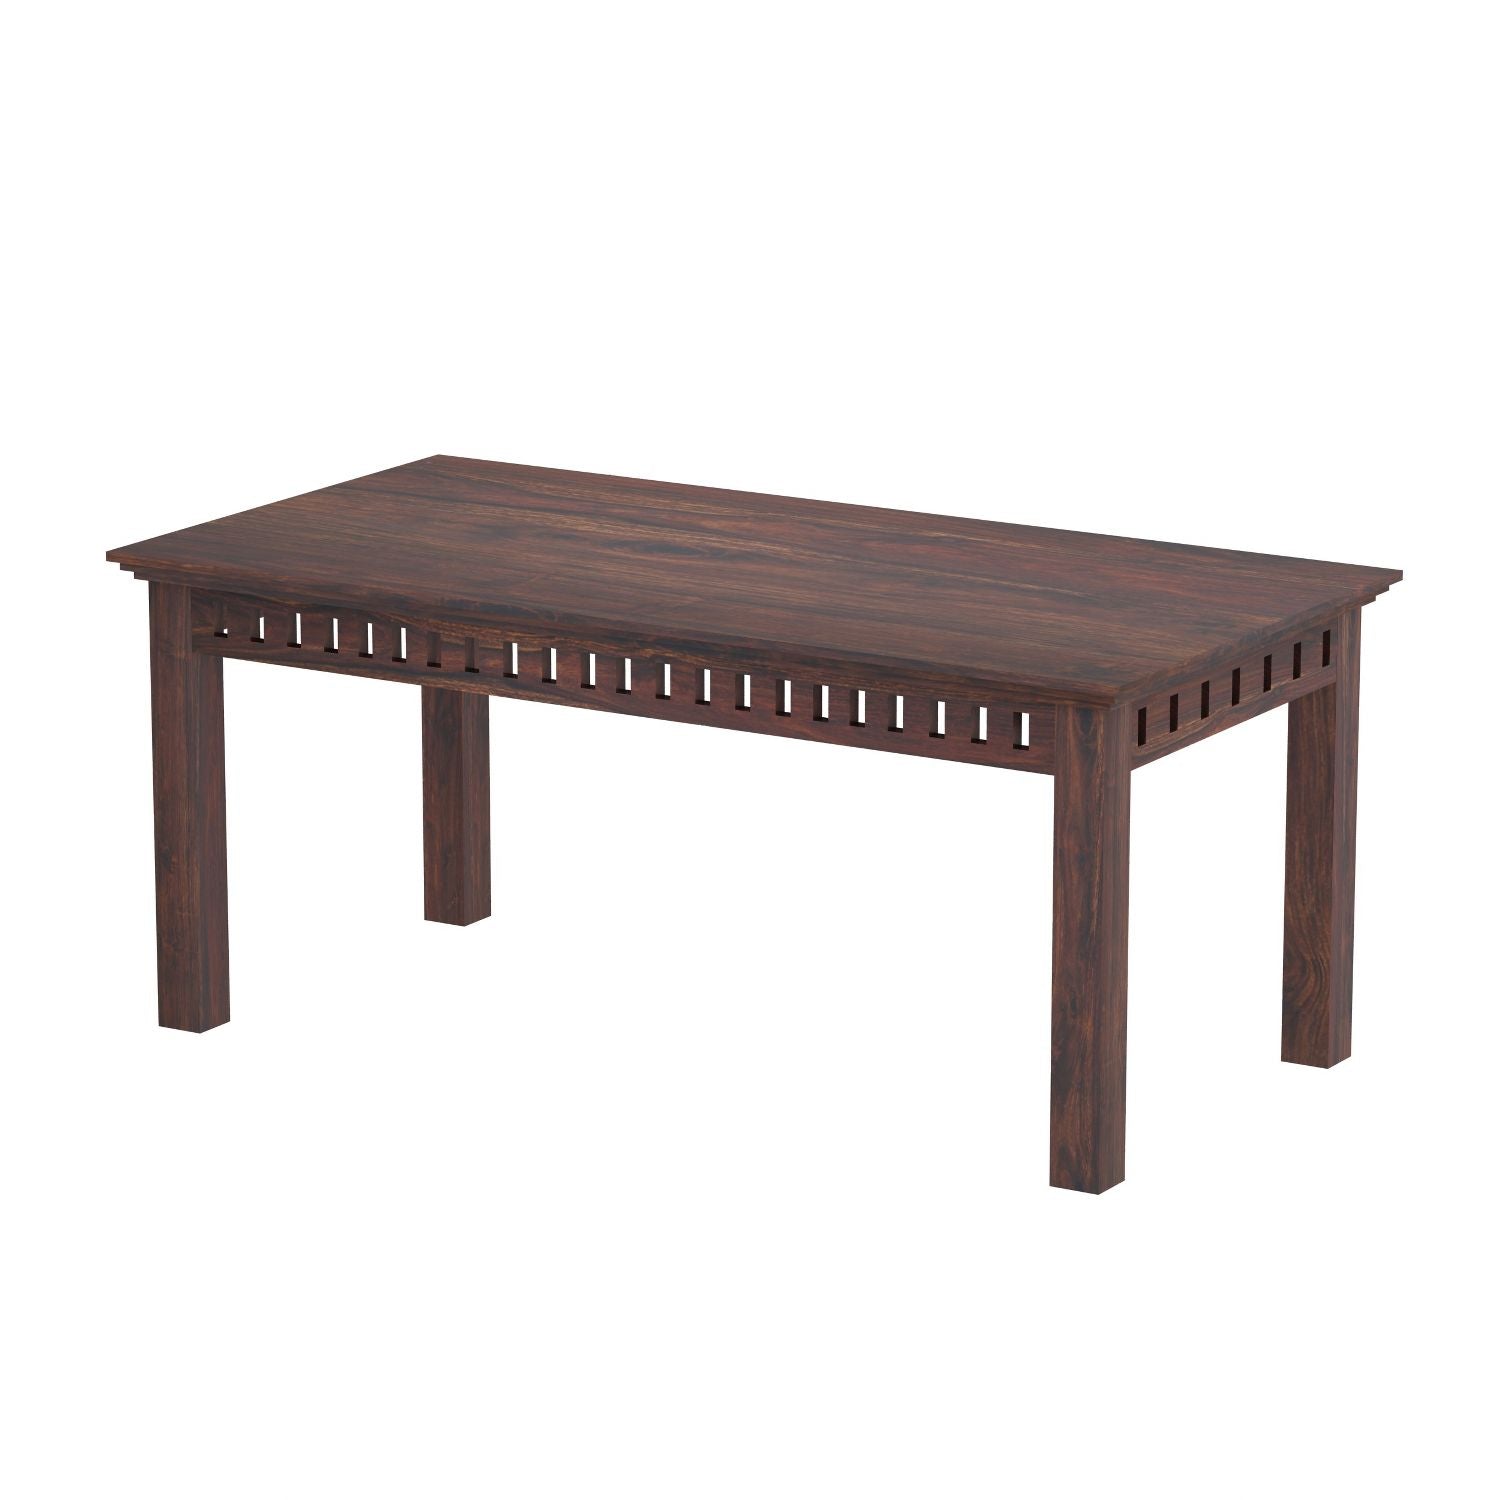 Amer Solid Sheesham Wood 6 Seater Dining Set With Bench (With Cushion, Walnut Finish)